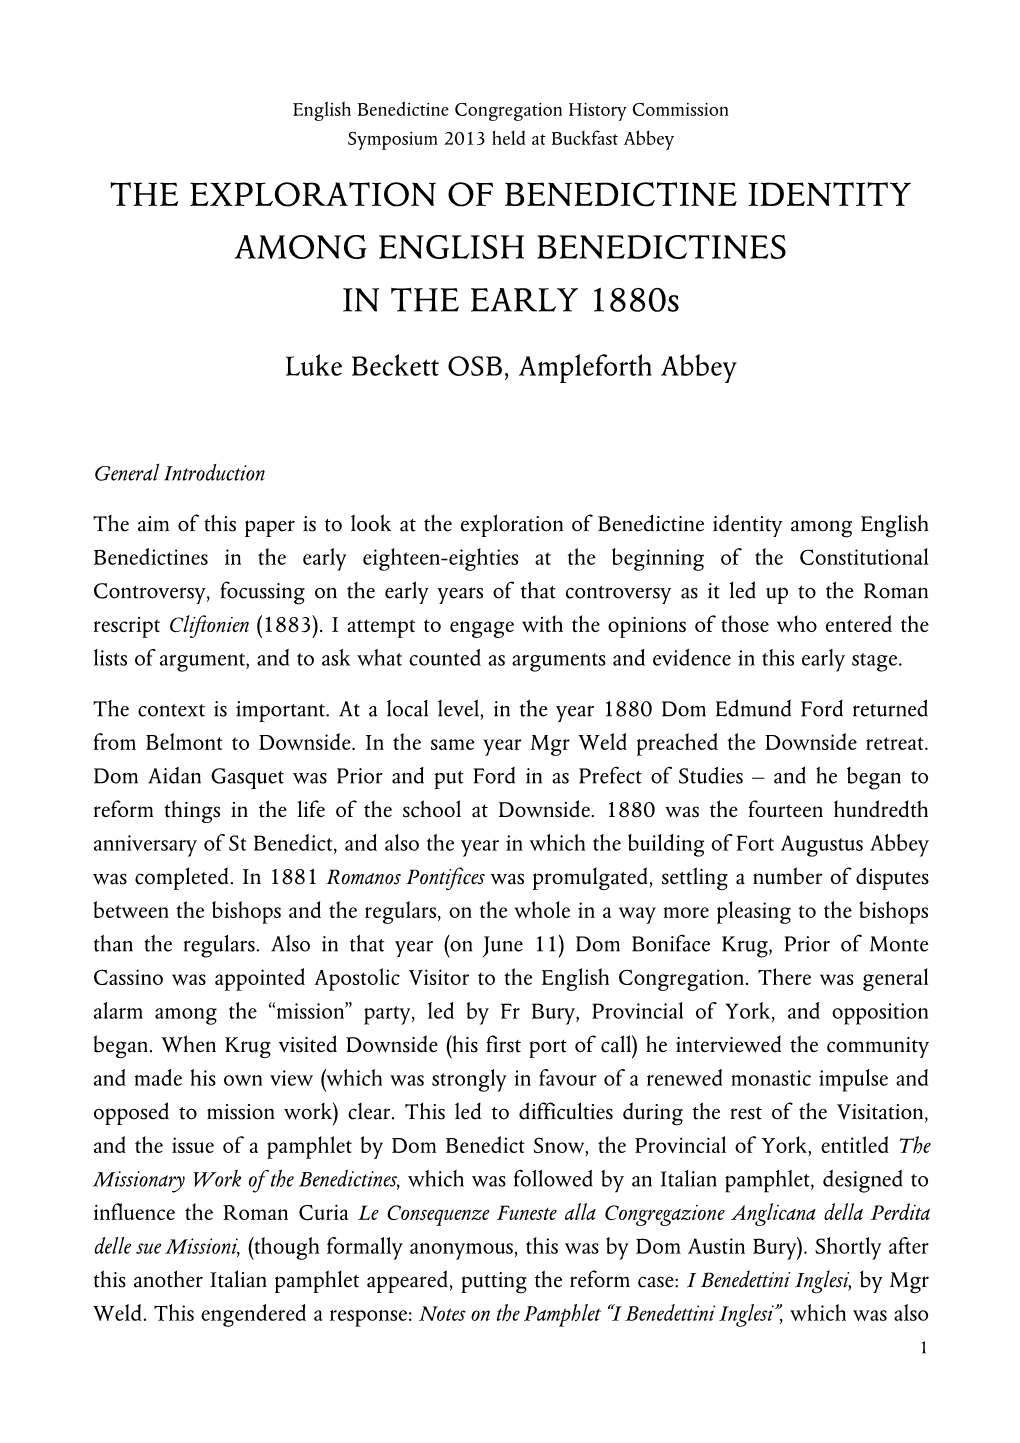 THE EXPLORATION of BENEDICTINE IDENTITY AMONG ENGLISH BENEDICTINES in the EARLY 1880S